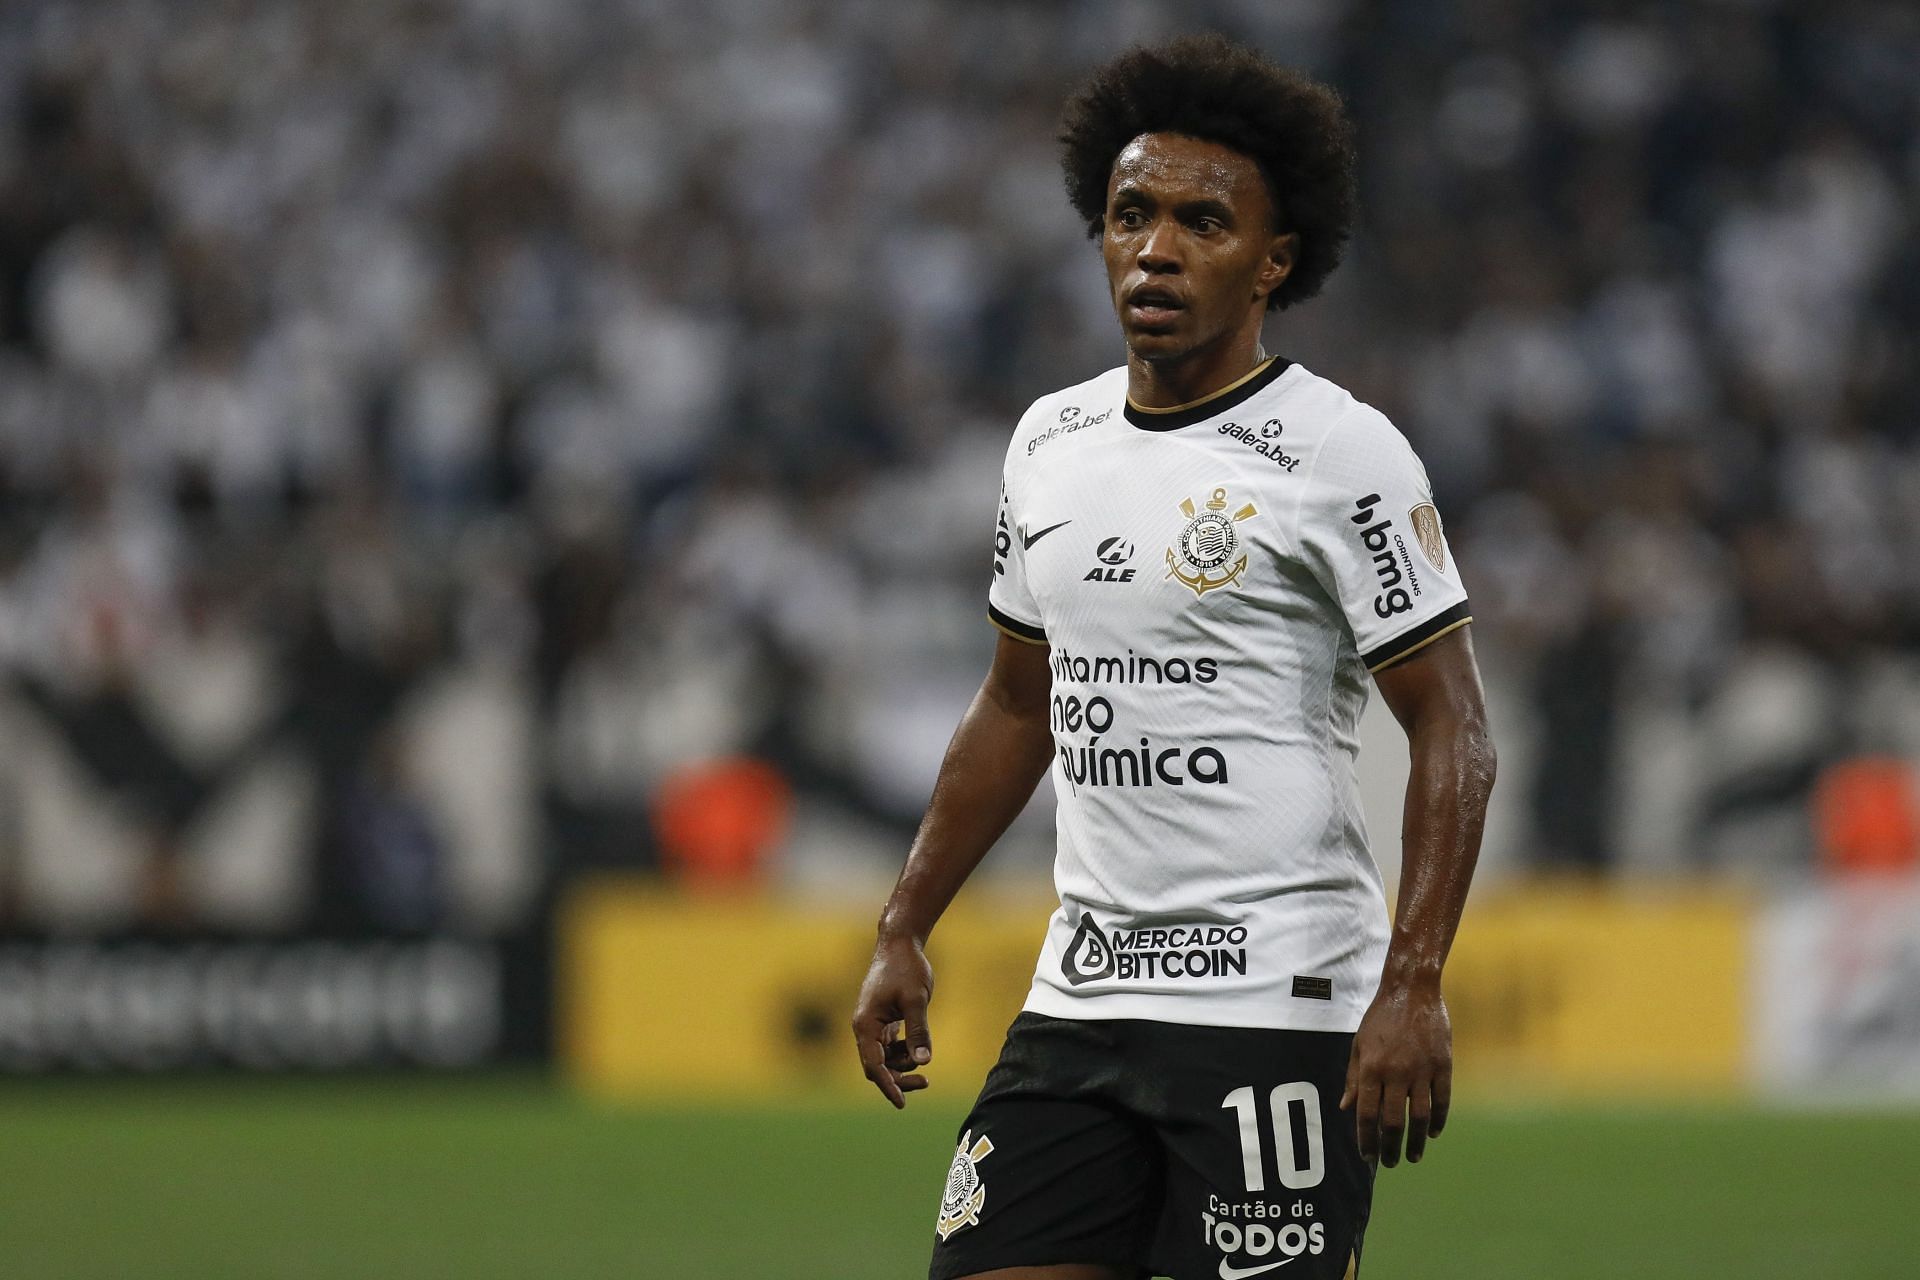 Corinthians will look to extend their lead at the top when they host America Mineiro on Sunday